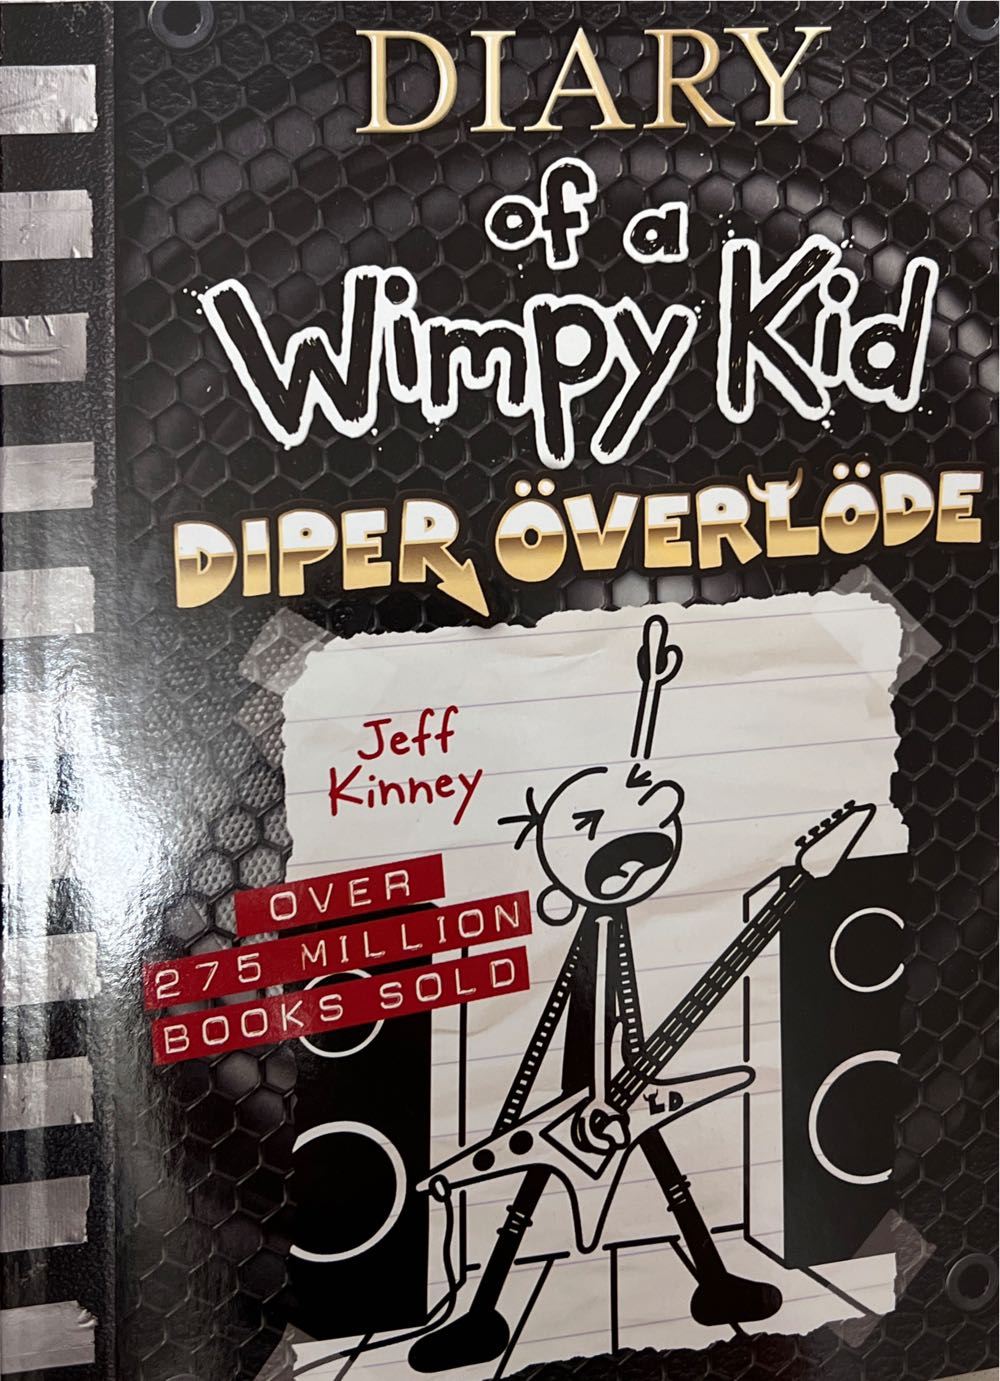 Diary Of A Wimpy Kid 17: Diper Overlode - Jeff Kinney book collectible [Barcode 9781419766510] - Main Image 1